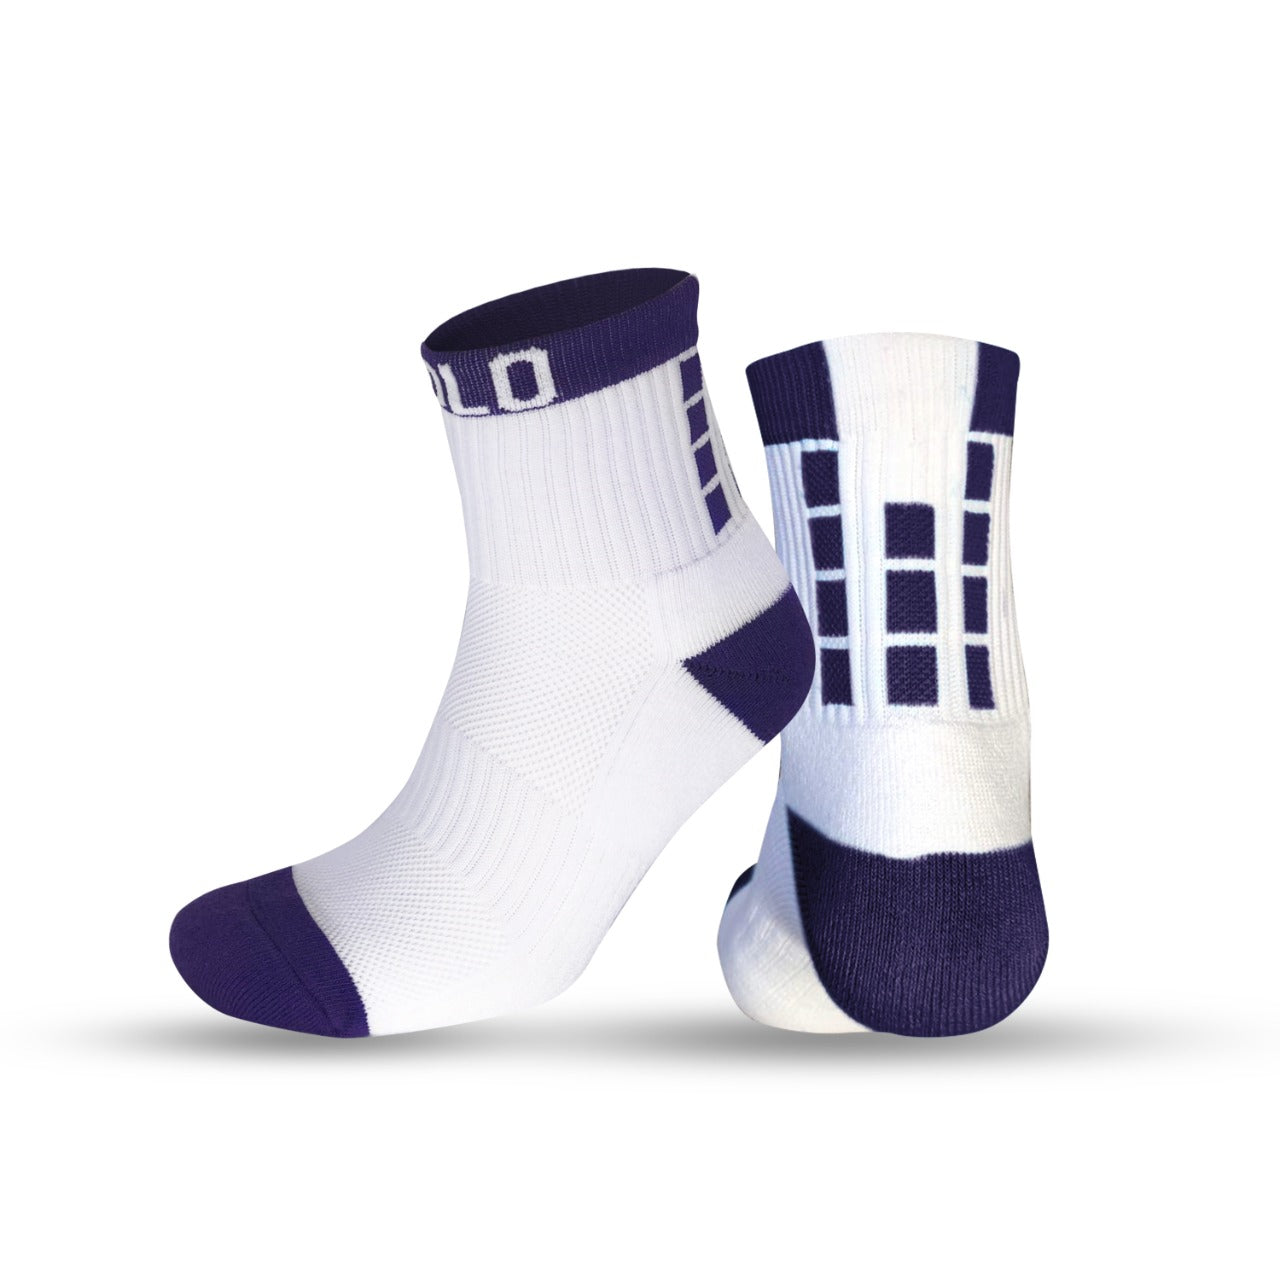 Low Rise Cushioned Ankle Socks - Purple/white